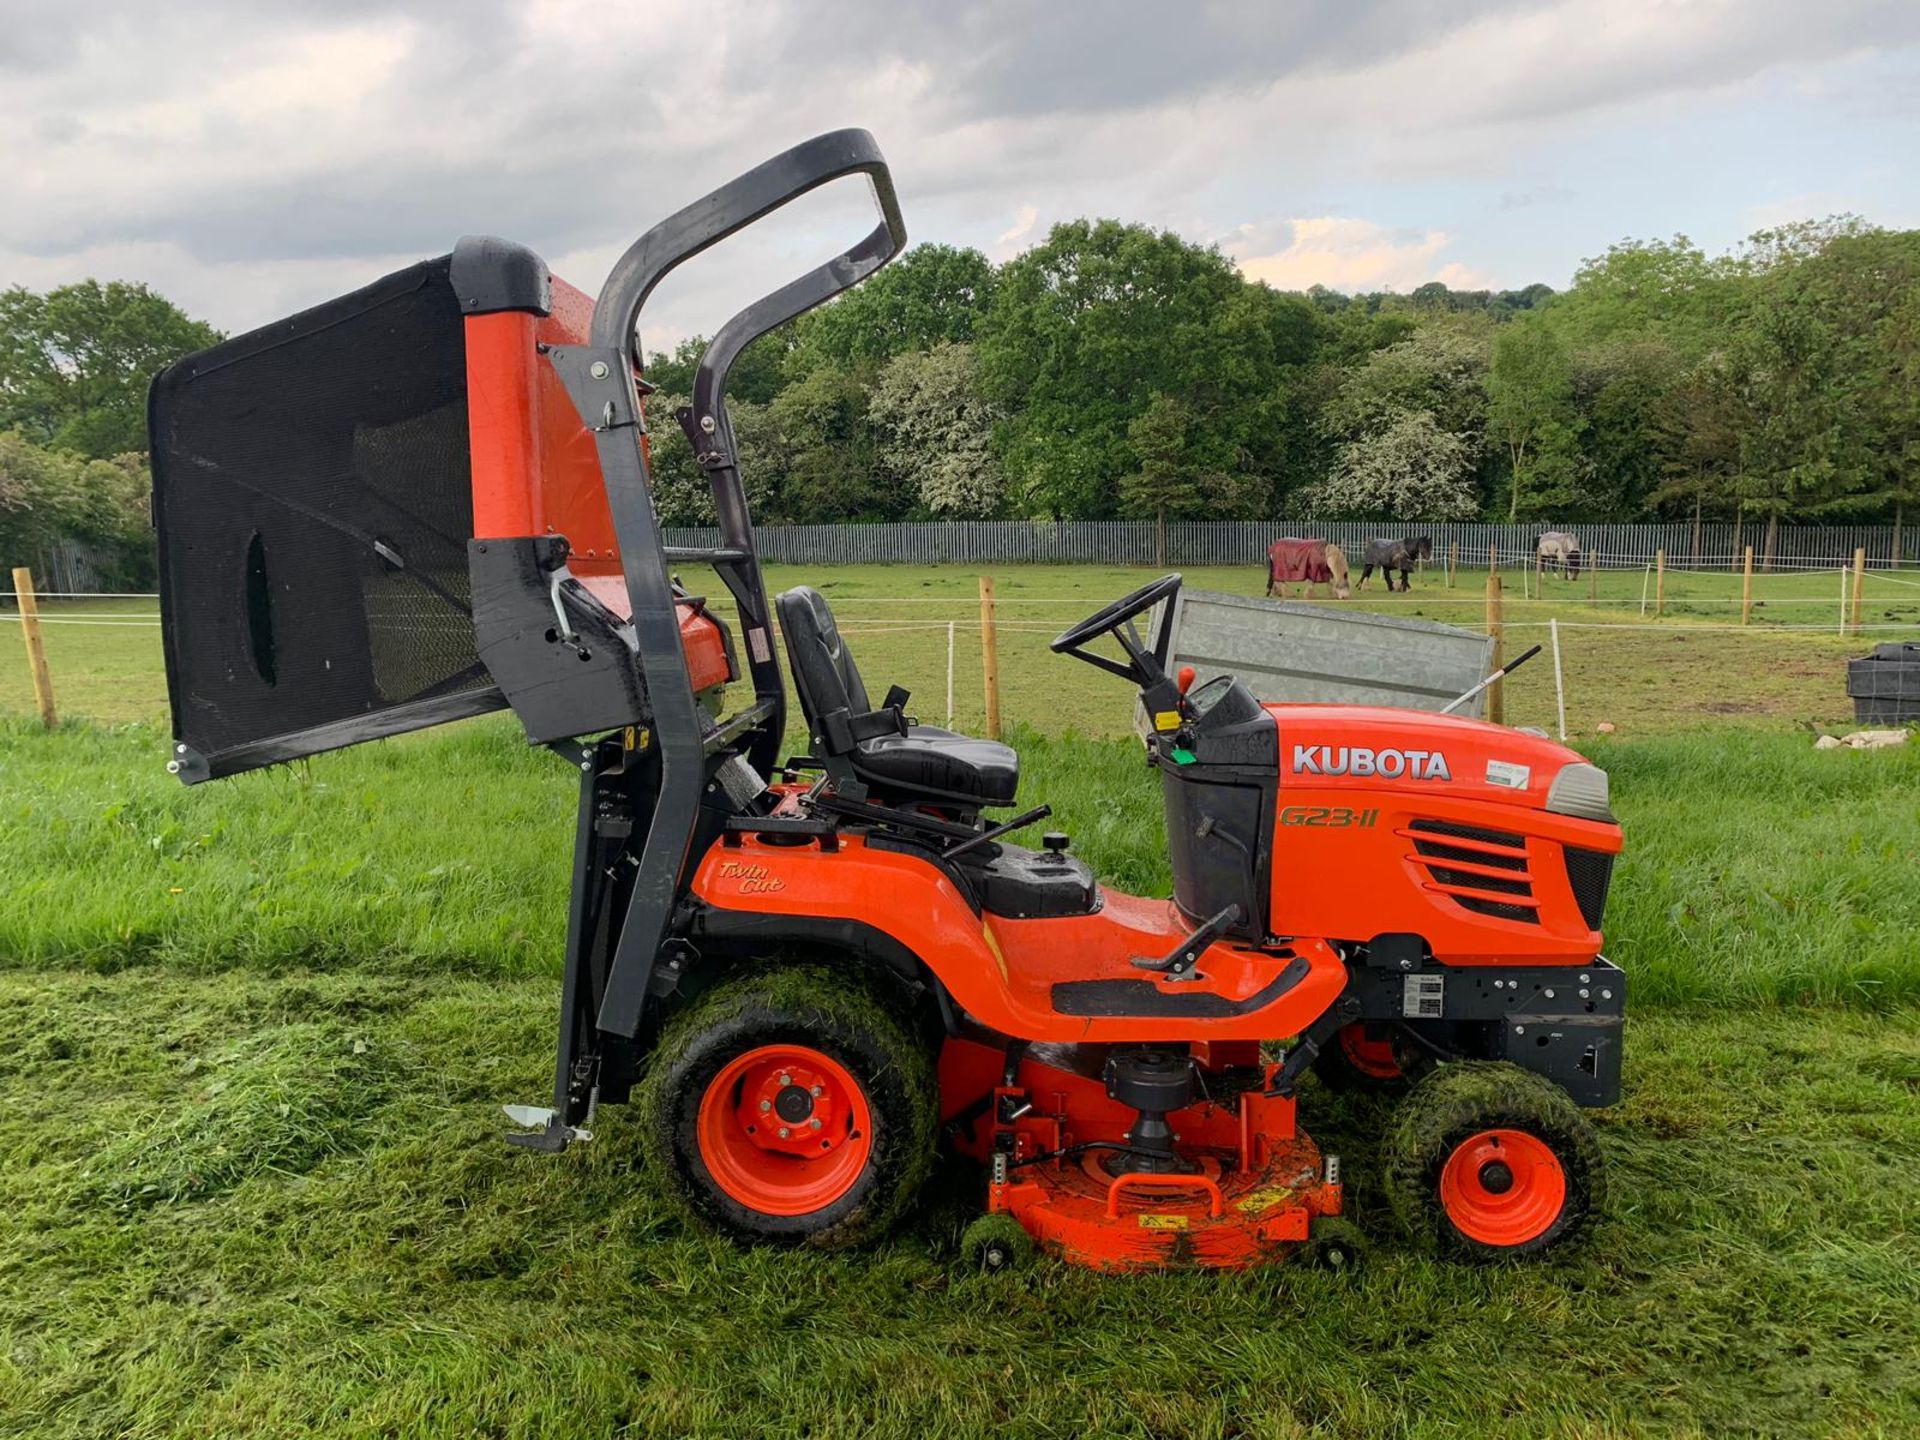 2015 KUBOTA G23-II TWIN CUT LAWN MOWER WITH ROLL BAR, HYDRAULIC TIP, LOW DUMP COLLECTOR - 28 HOURS!! - Image 5 of 15